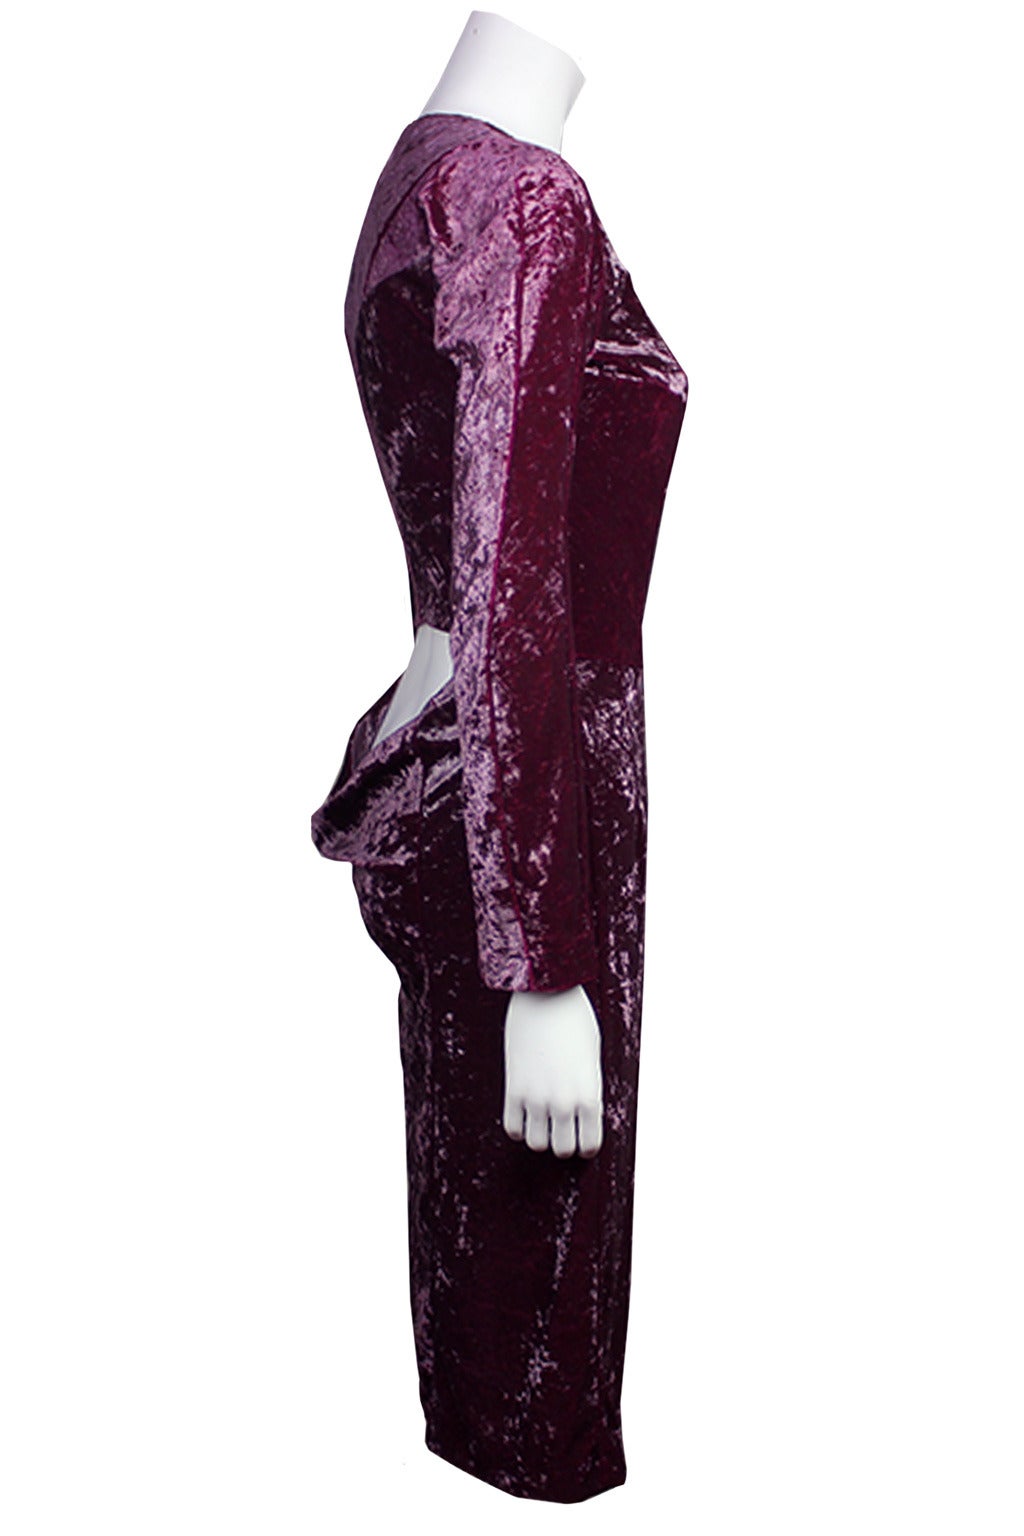 SALE Originally $660
Made from a lush purple crushed velvet, this dress is a slim fit with a sexy deep cut out back. Long sleeves compliment the beautifully seamed front.